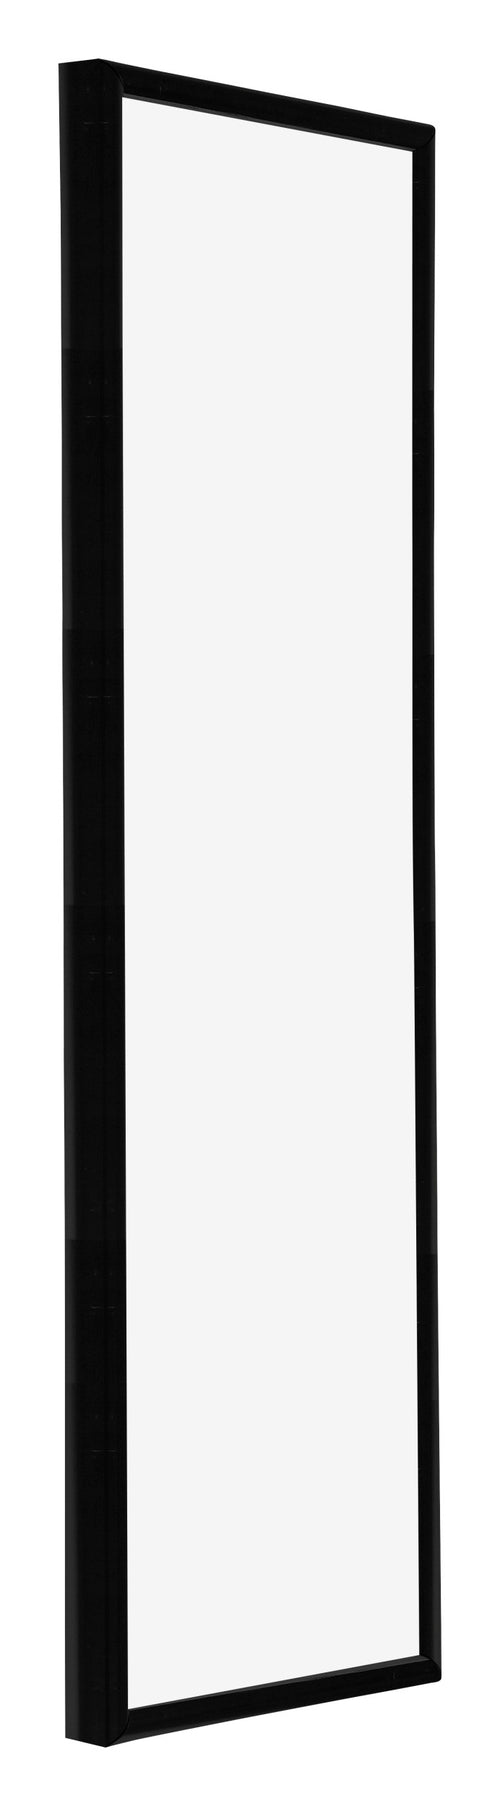 Annecy Plastic Photo Frame 25x75cm Black High Gloss Front Oblique | Yourdecoration.co.uk